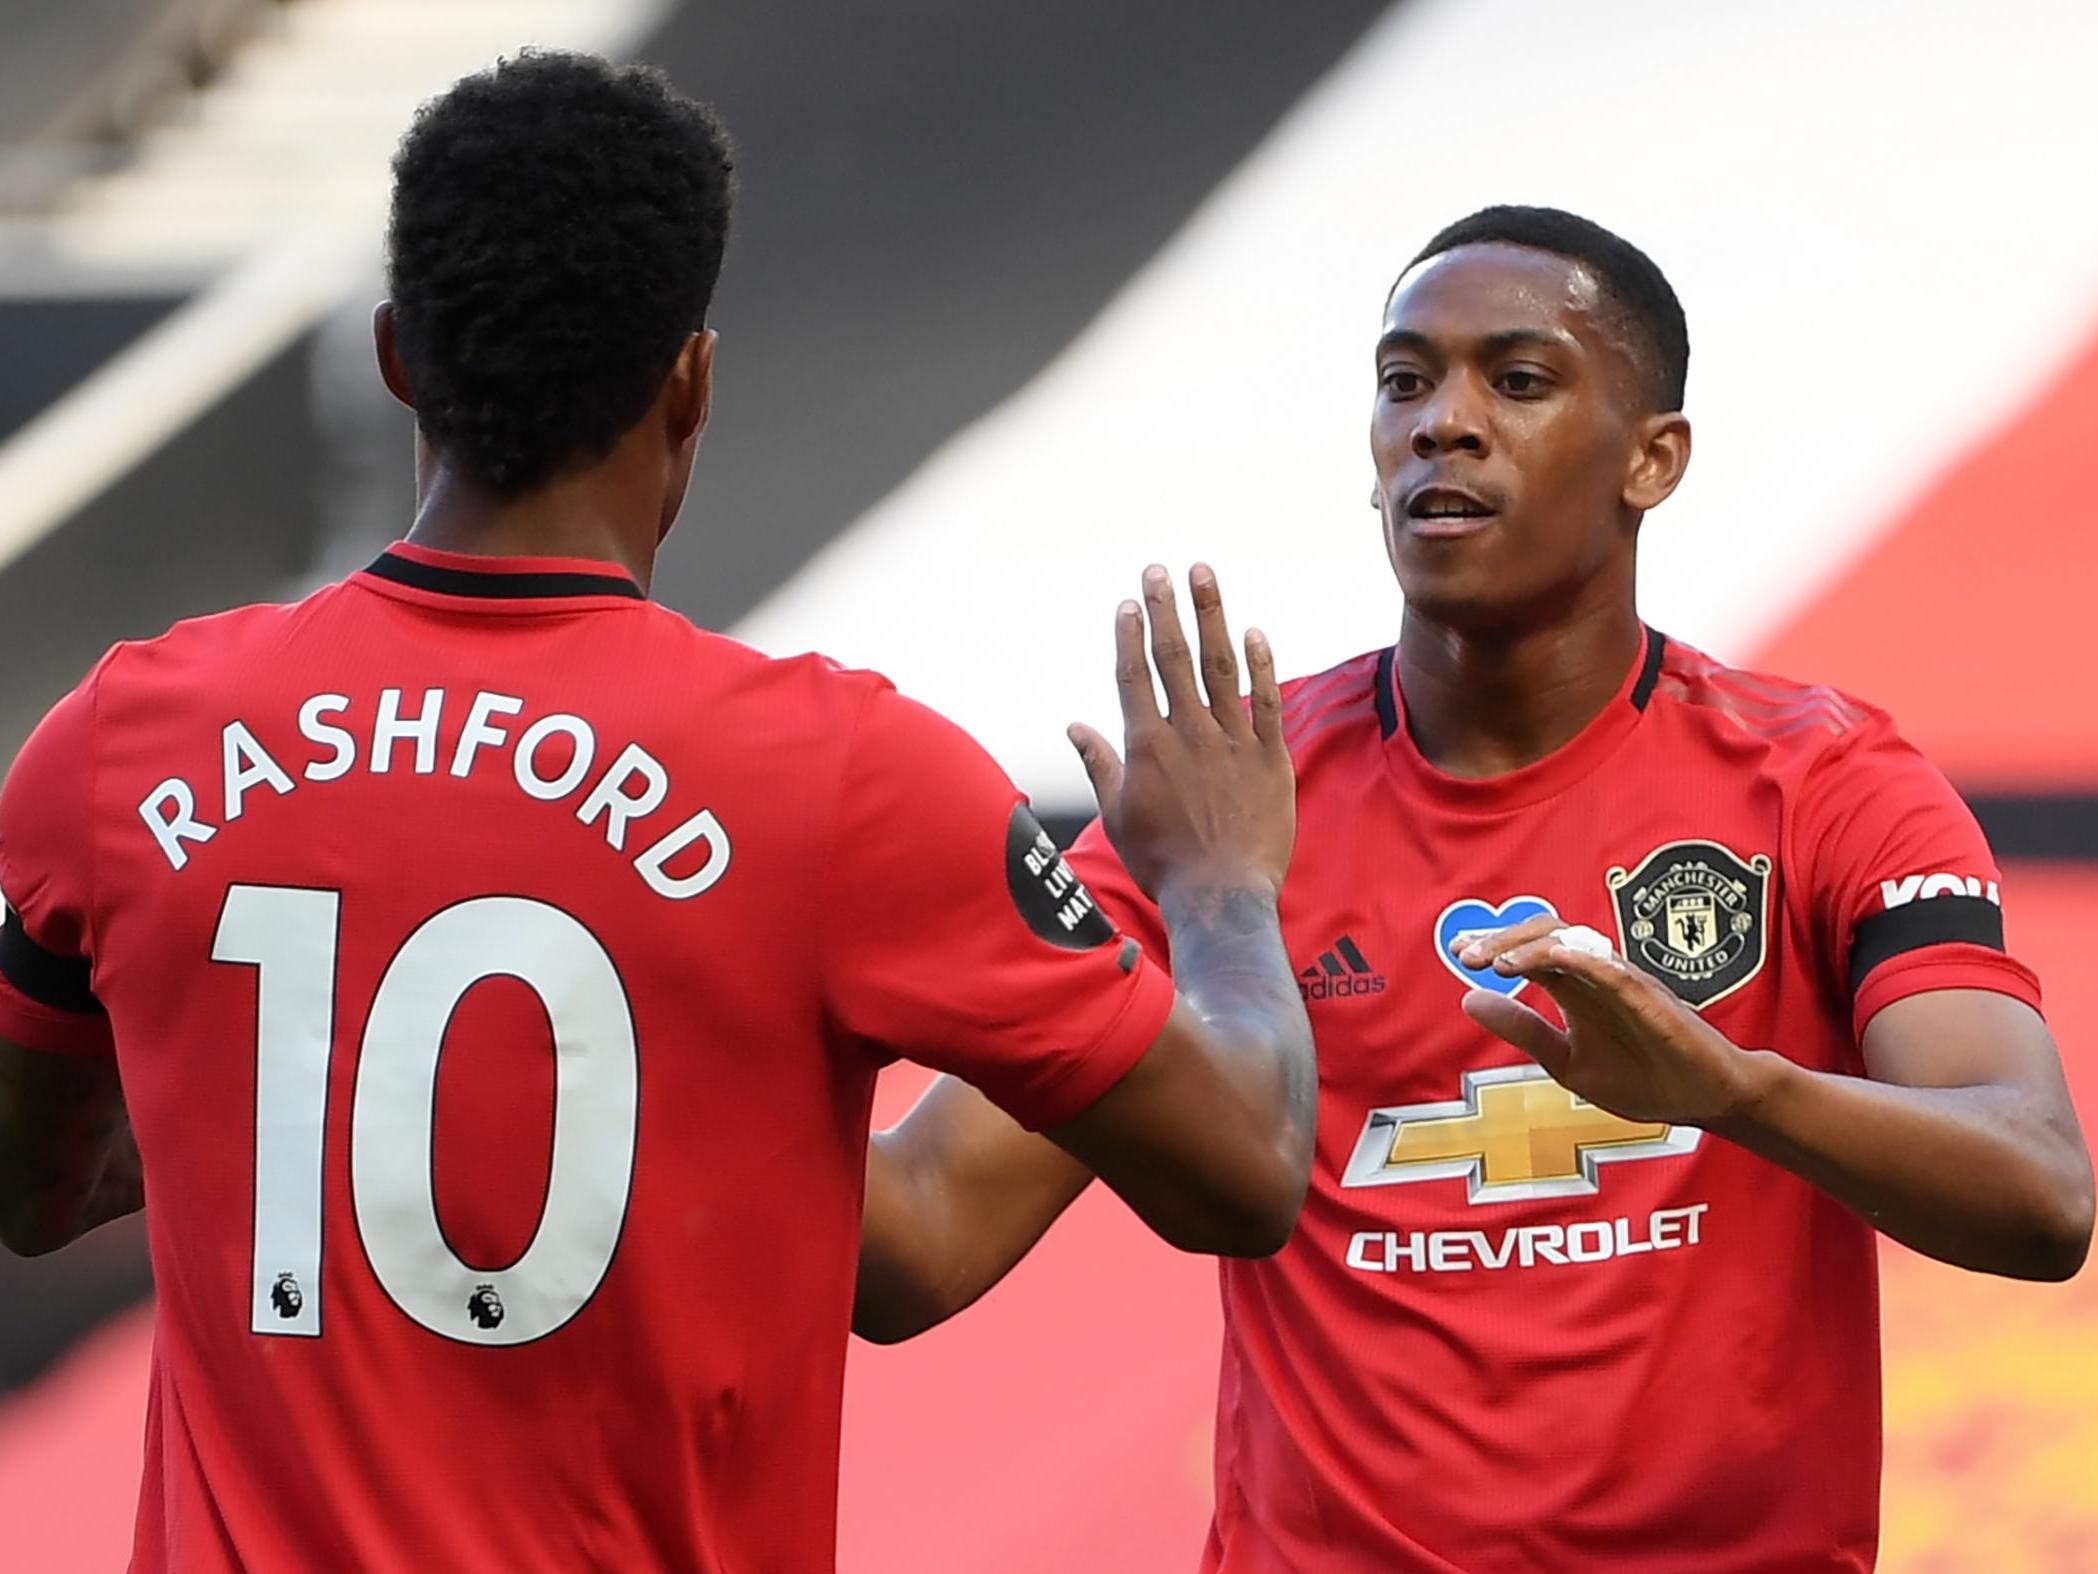 Ole Gunnar Solskjaer warns Marcus Rashford and Anthony Martial they have no 'divine right' to start at Man United